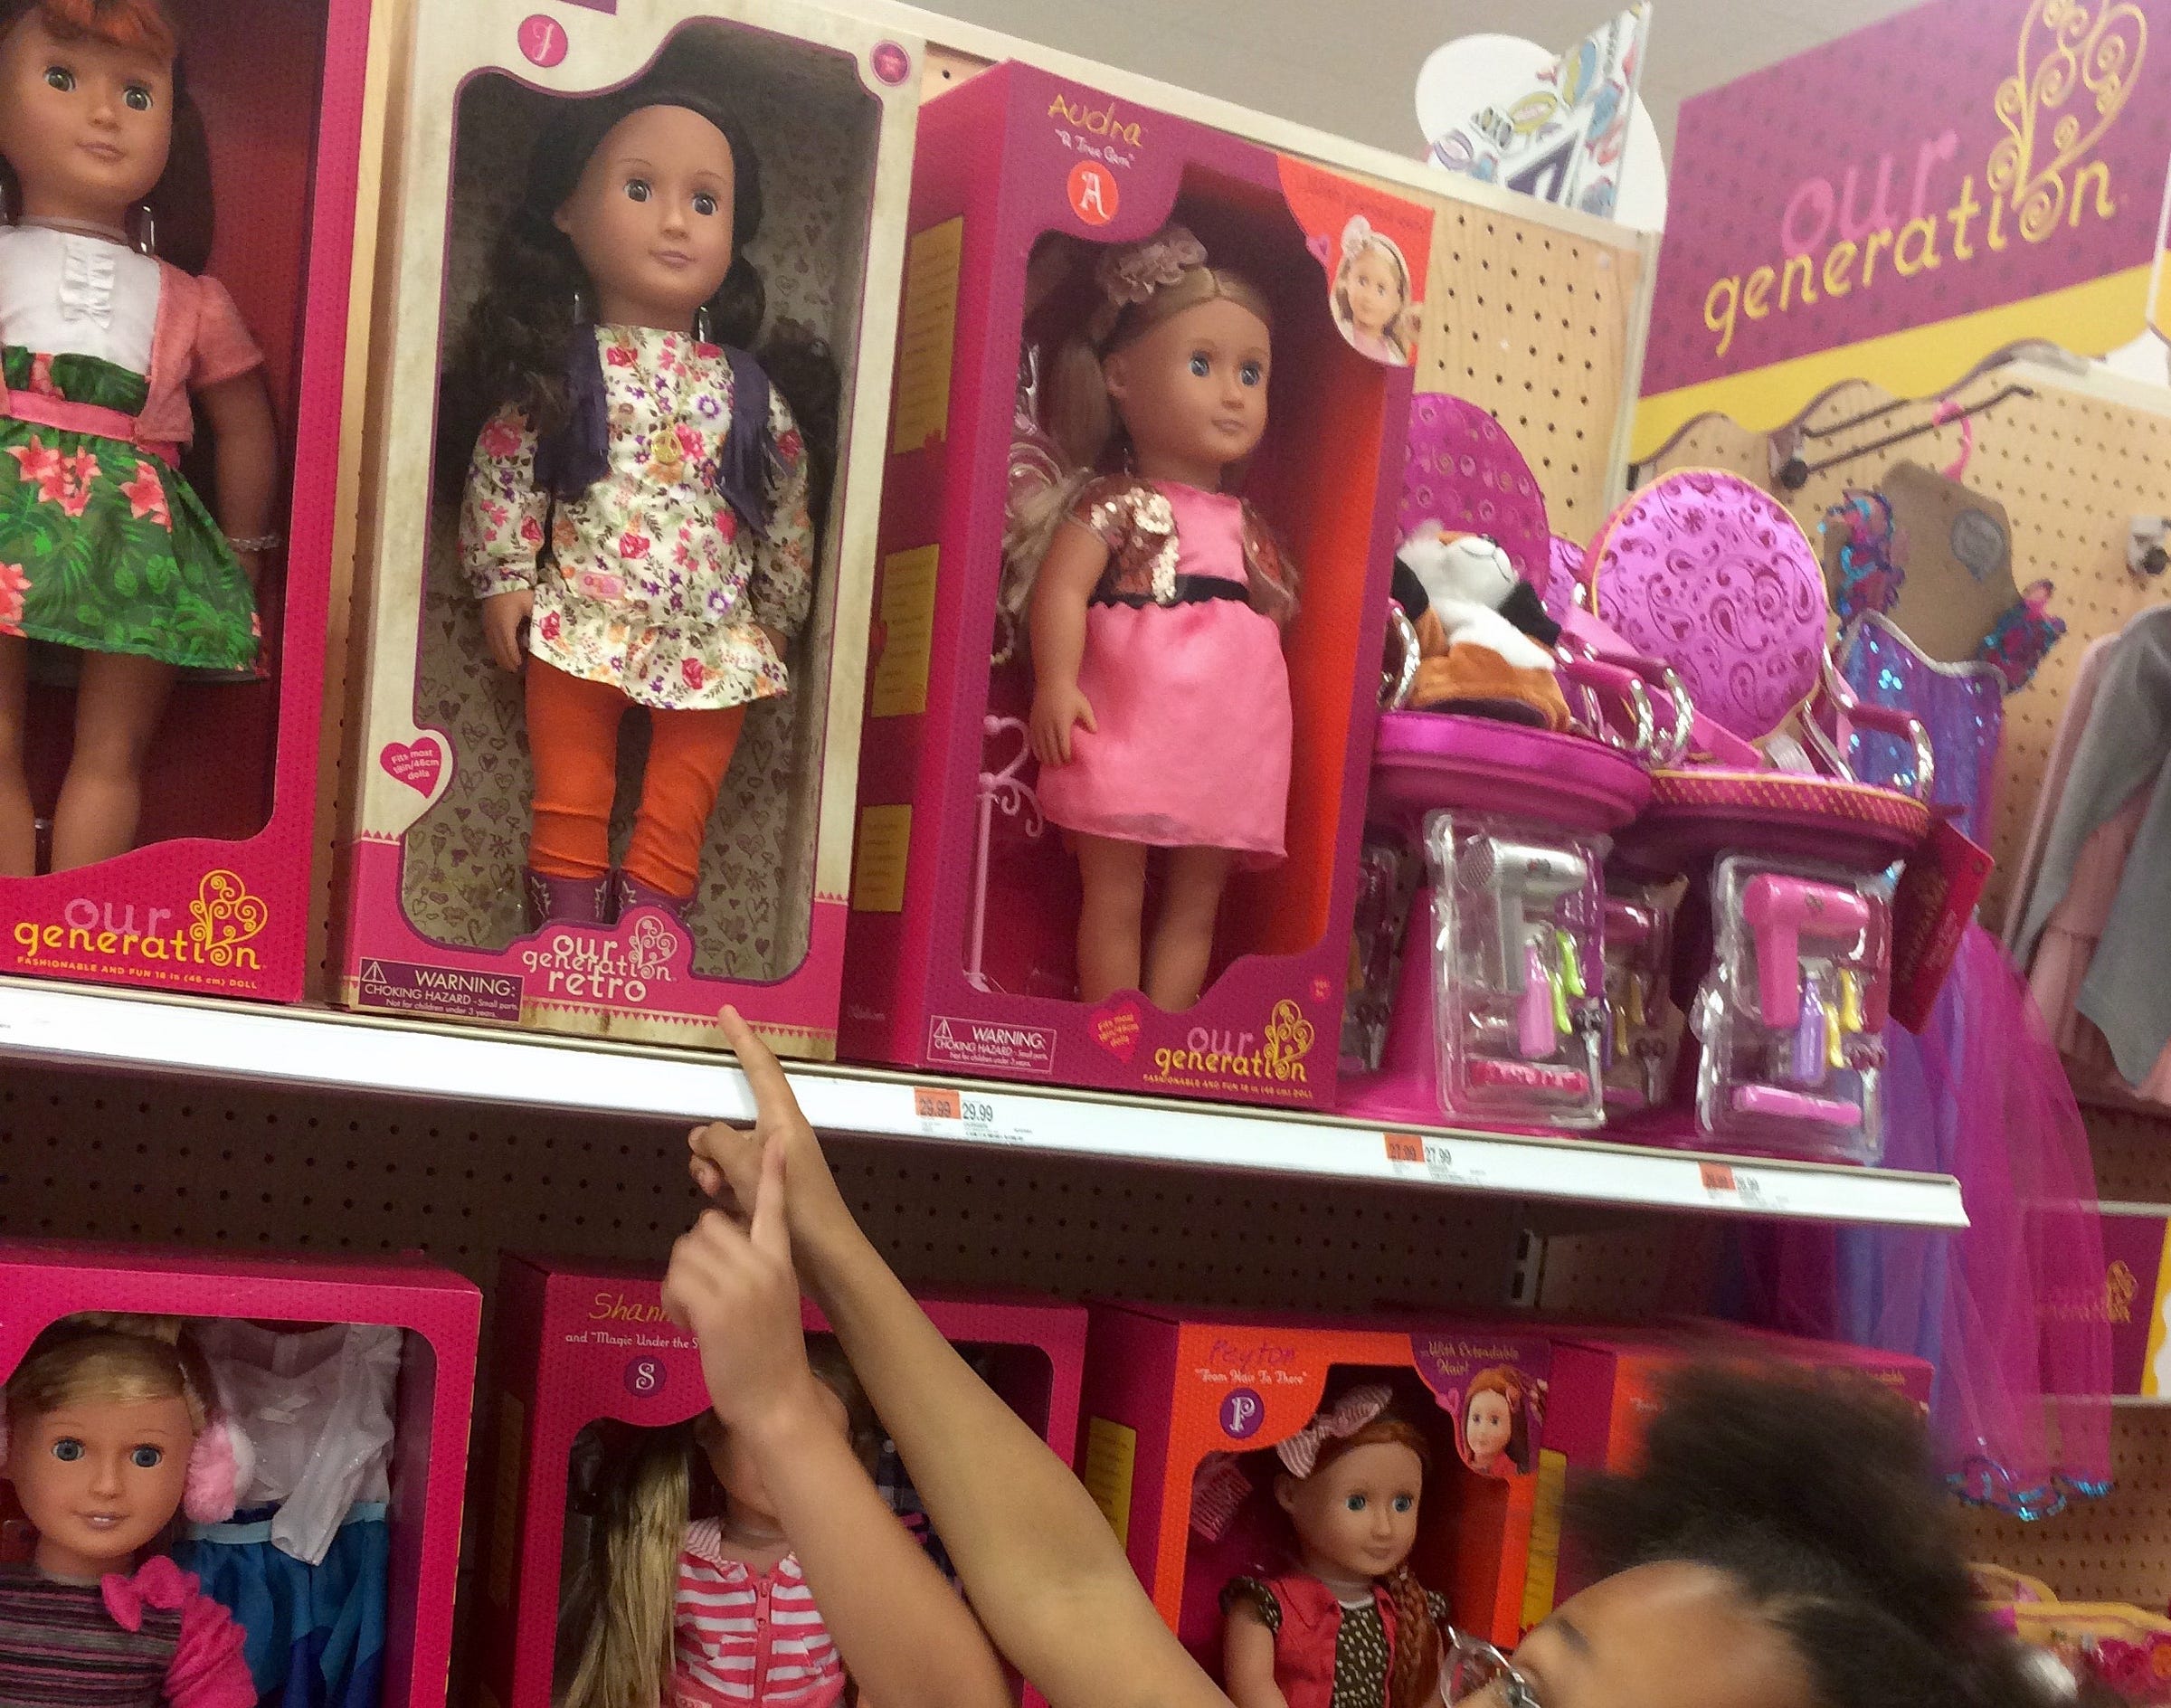 Why are all the white dolls sitting together on the Target shelf?